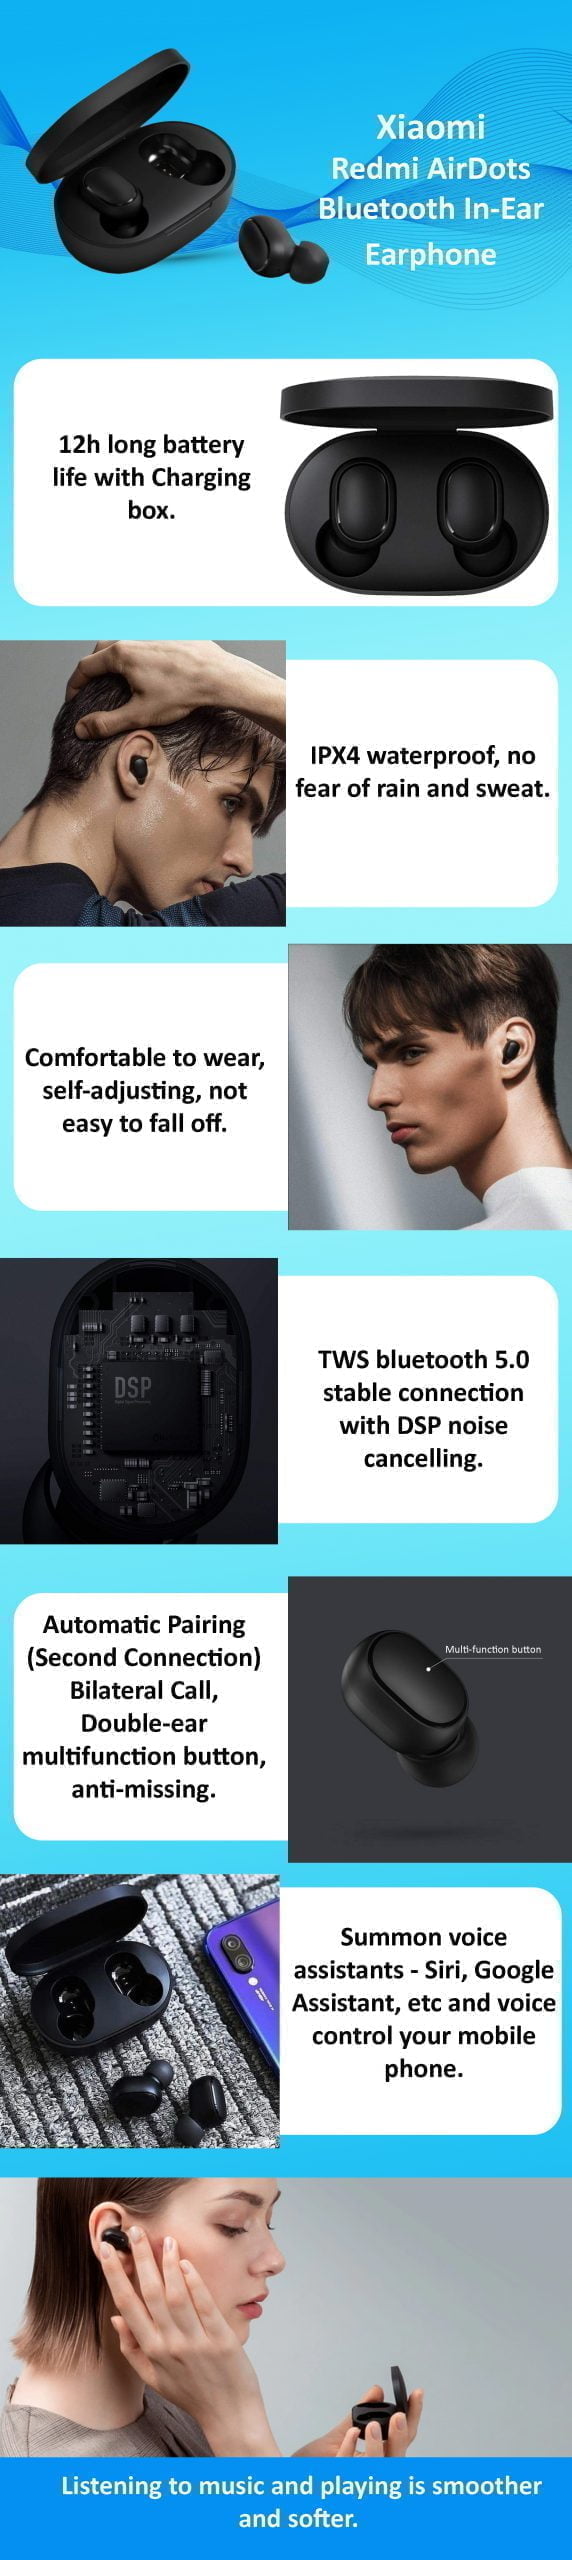 N28808527A 1 Scaled Xiaomi Redmi Airdots Is Equipped With The Latest Bluetooth 5.0 Chip, The Data Transfer Rate Is Up To 2 Times Compared With The Previous Generation, The Connection Is Faster And More Stable. Listening To Songs And Playing Games Are Smoother. Https://Youtu.be/Navo49Ya_Re Xiaomi Xiaomi Earbuds Basic Total-Wireless Earbuds - Black